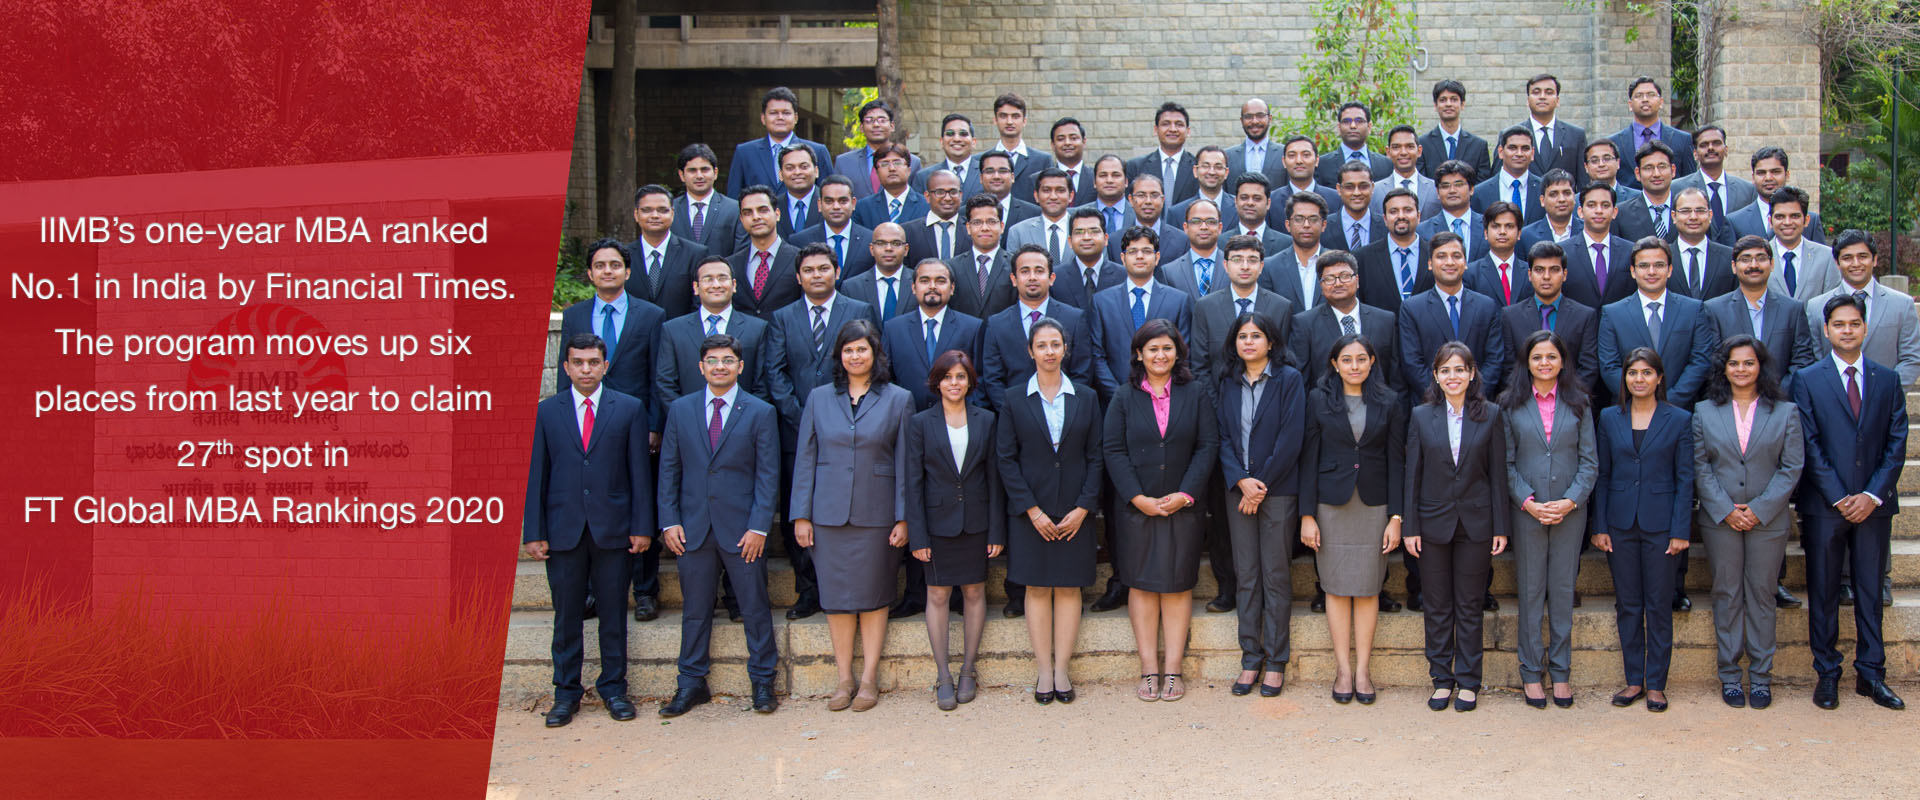 Three BSchools from India break into Top 50 Global One Year MBA programmes